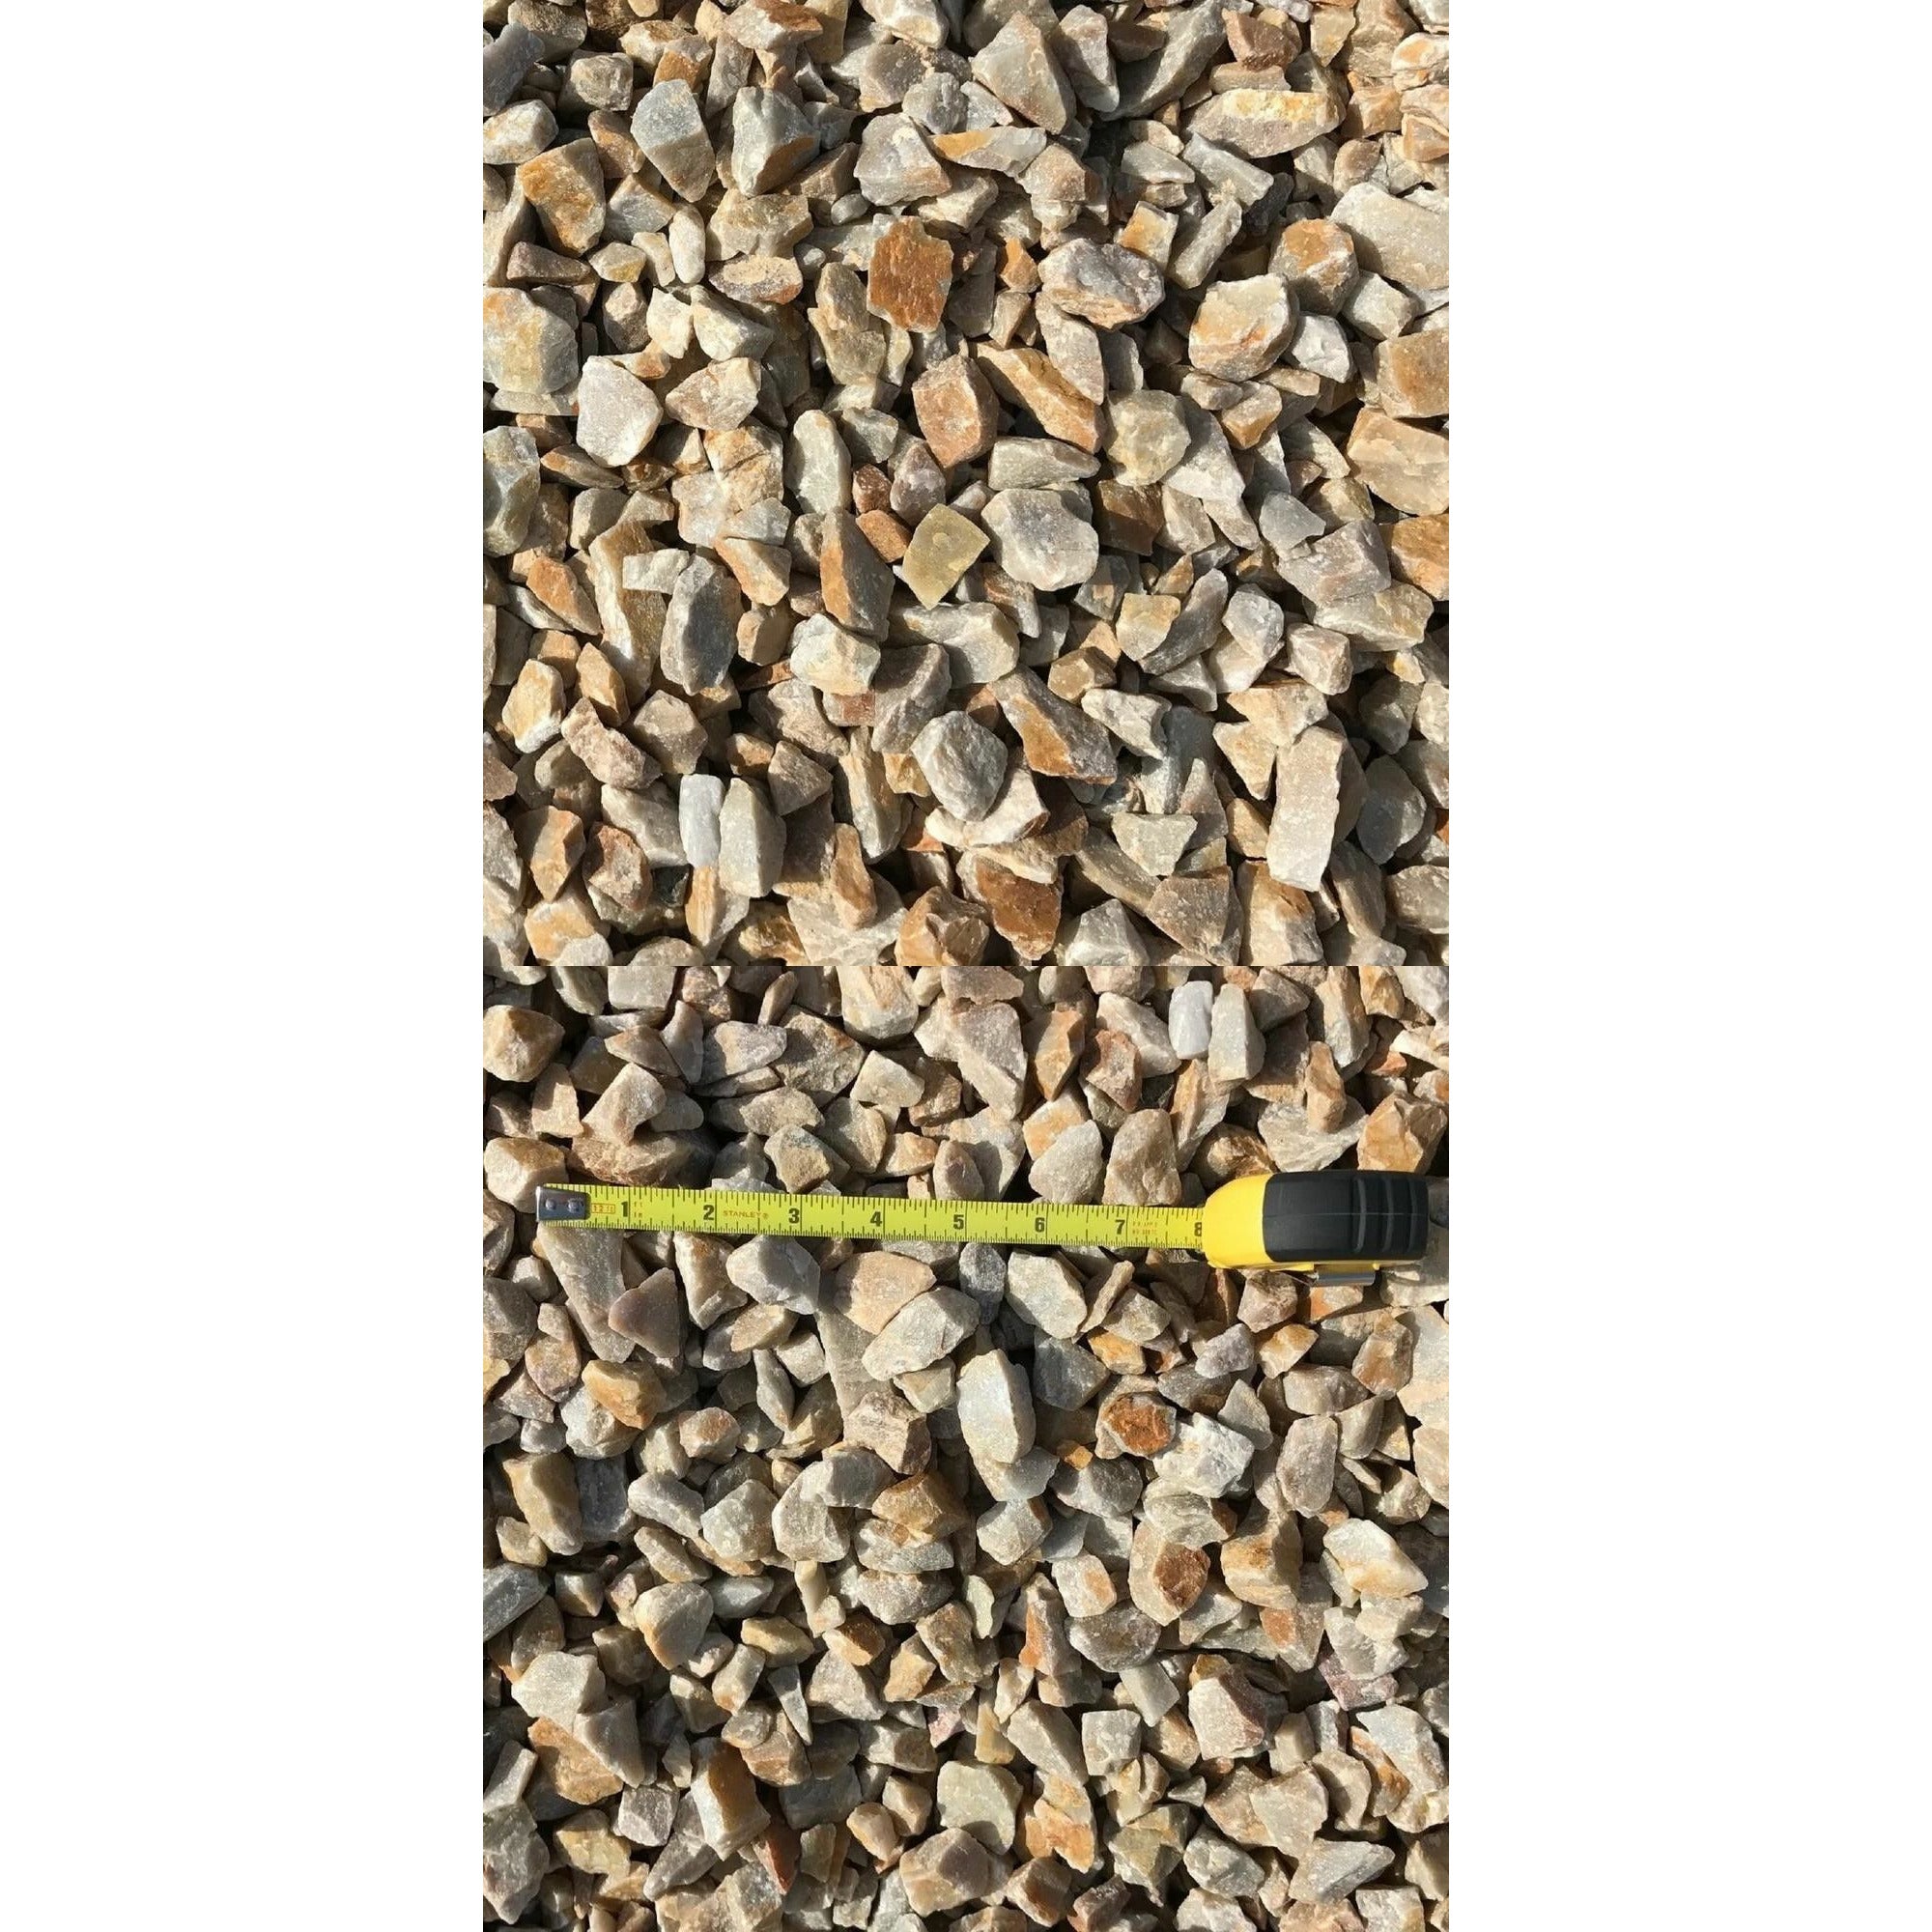 13MM Brown Crushed Stone Gravel -  8 Tons